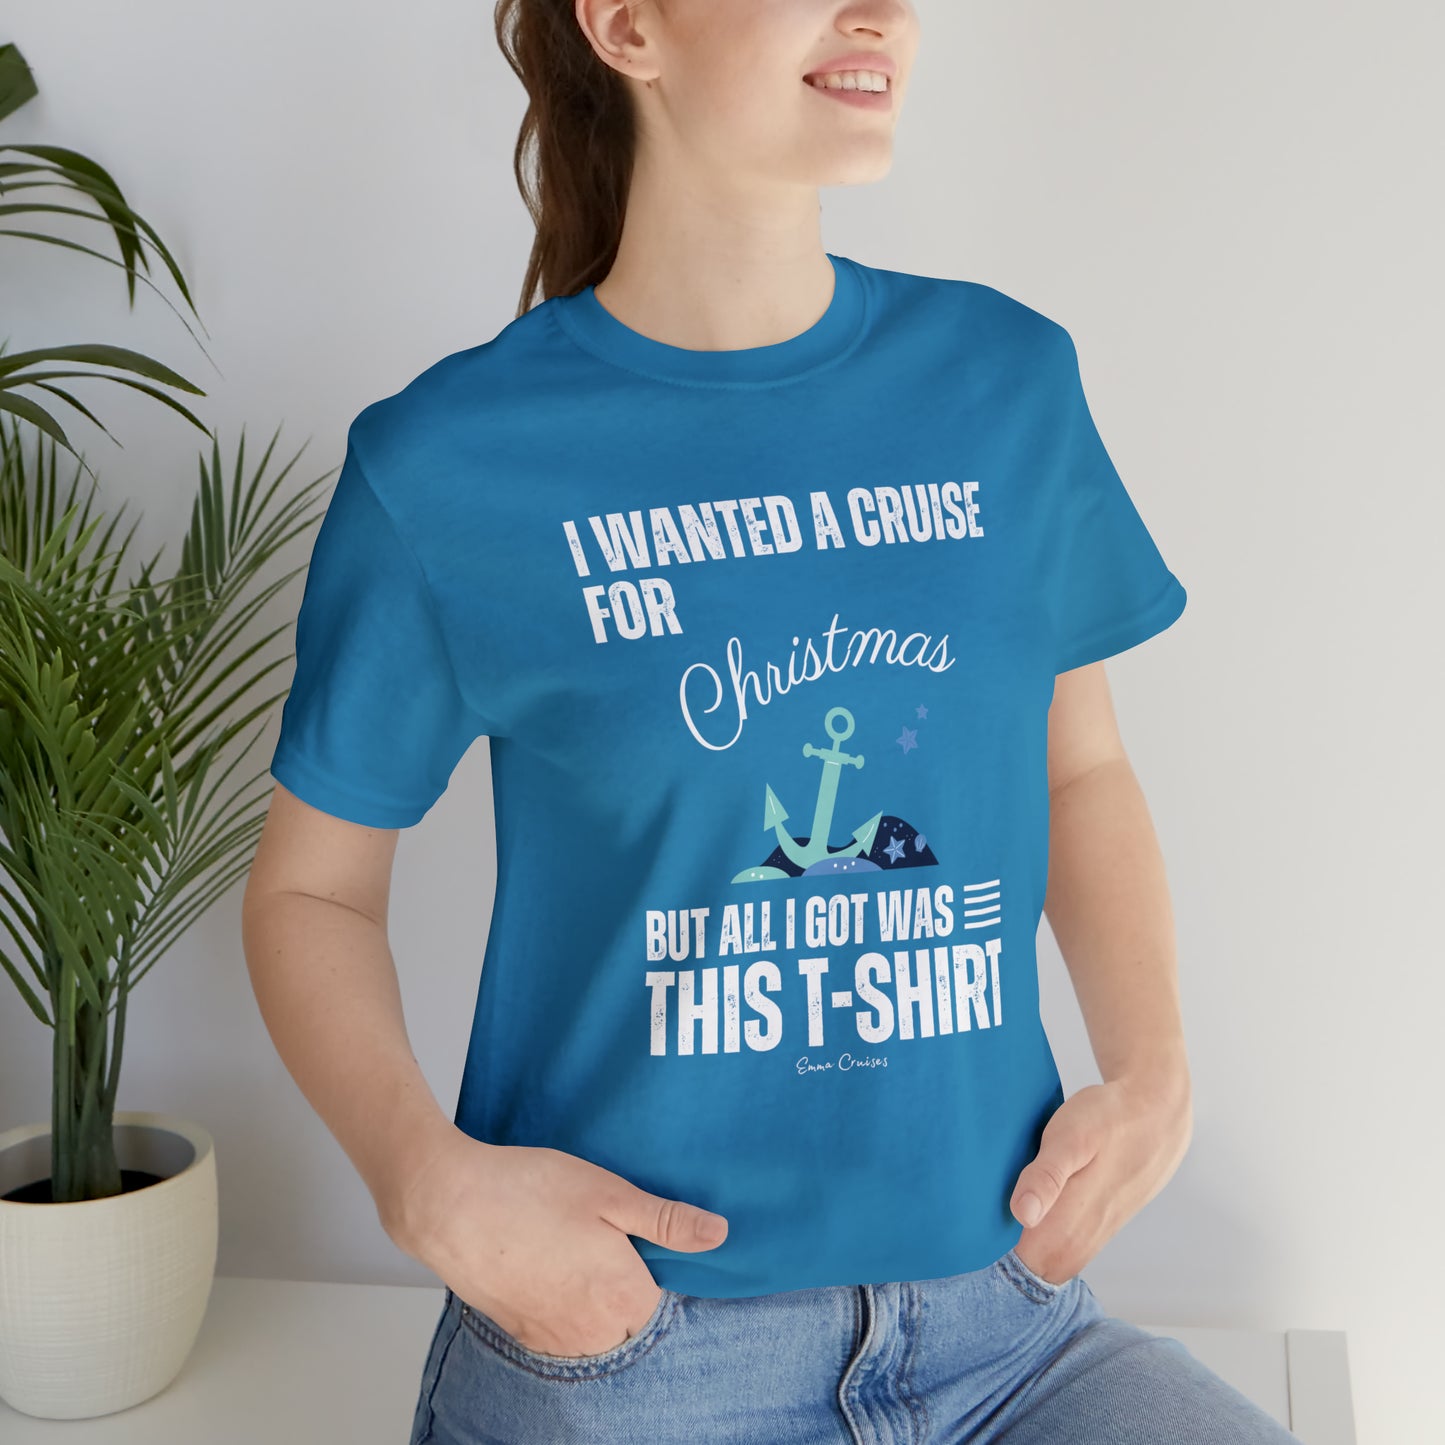 I Wanted a Cruise for Christmas - UNISEX T-Shirt